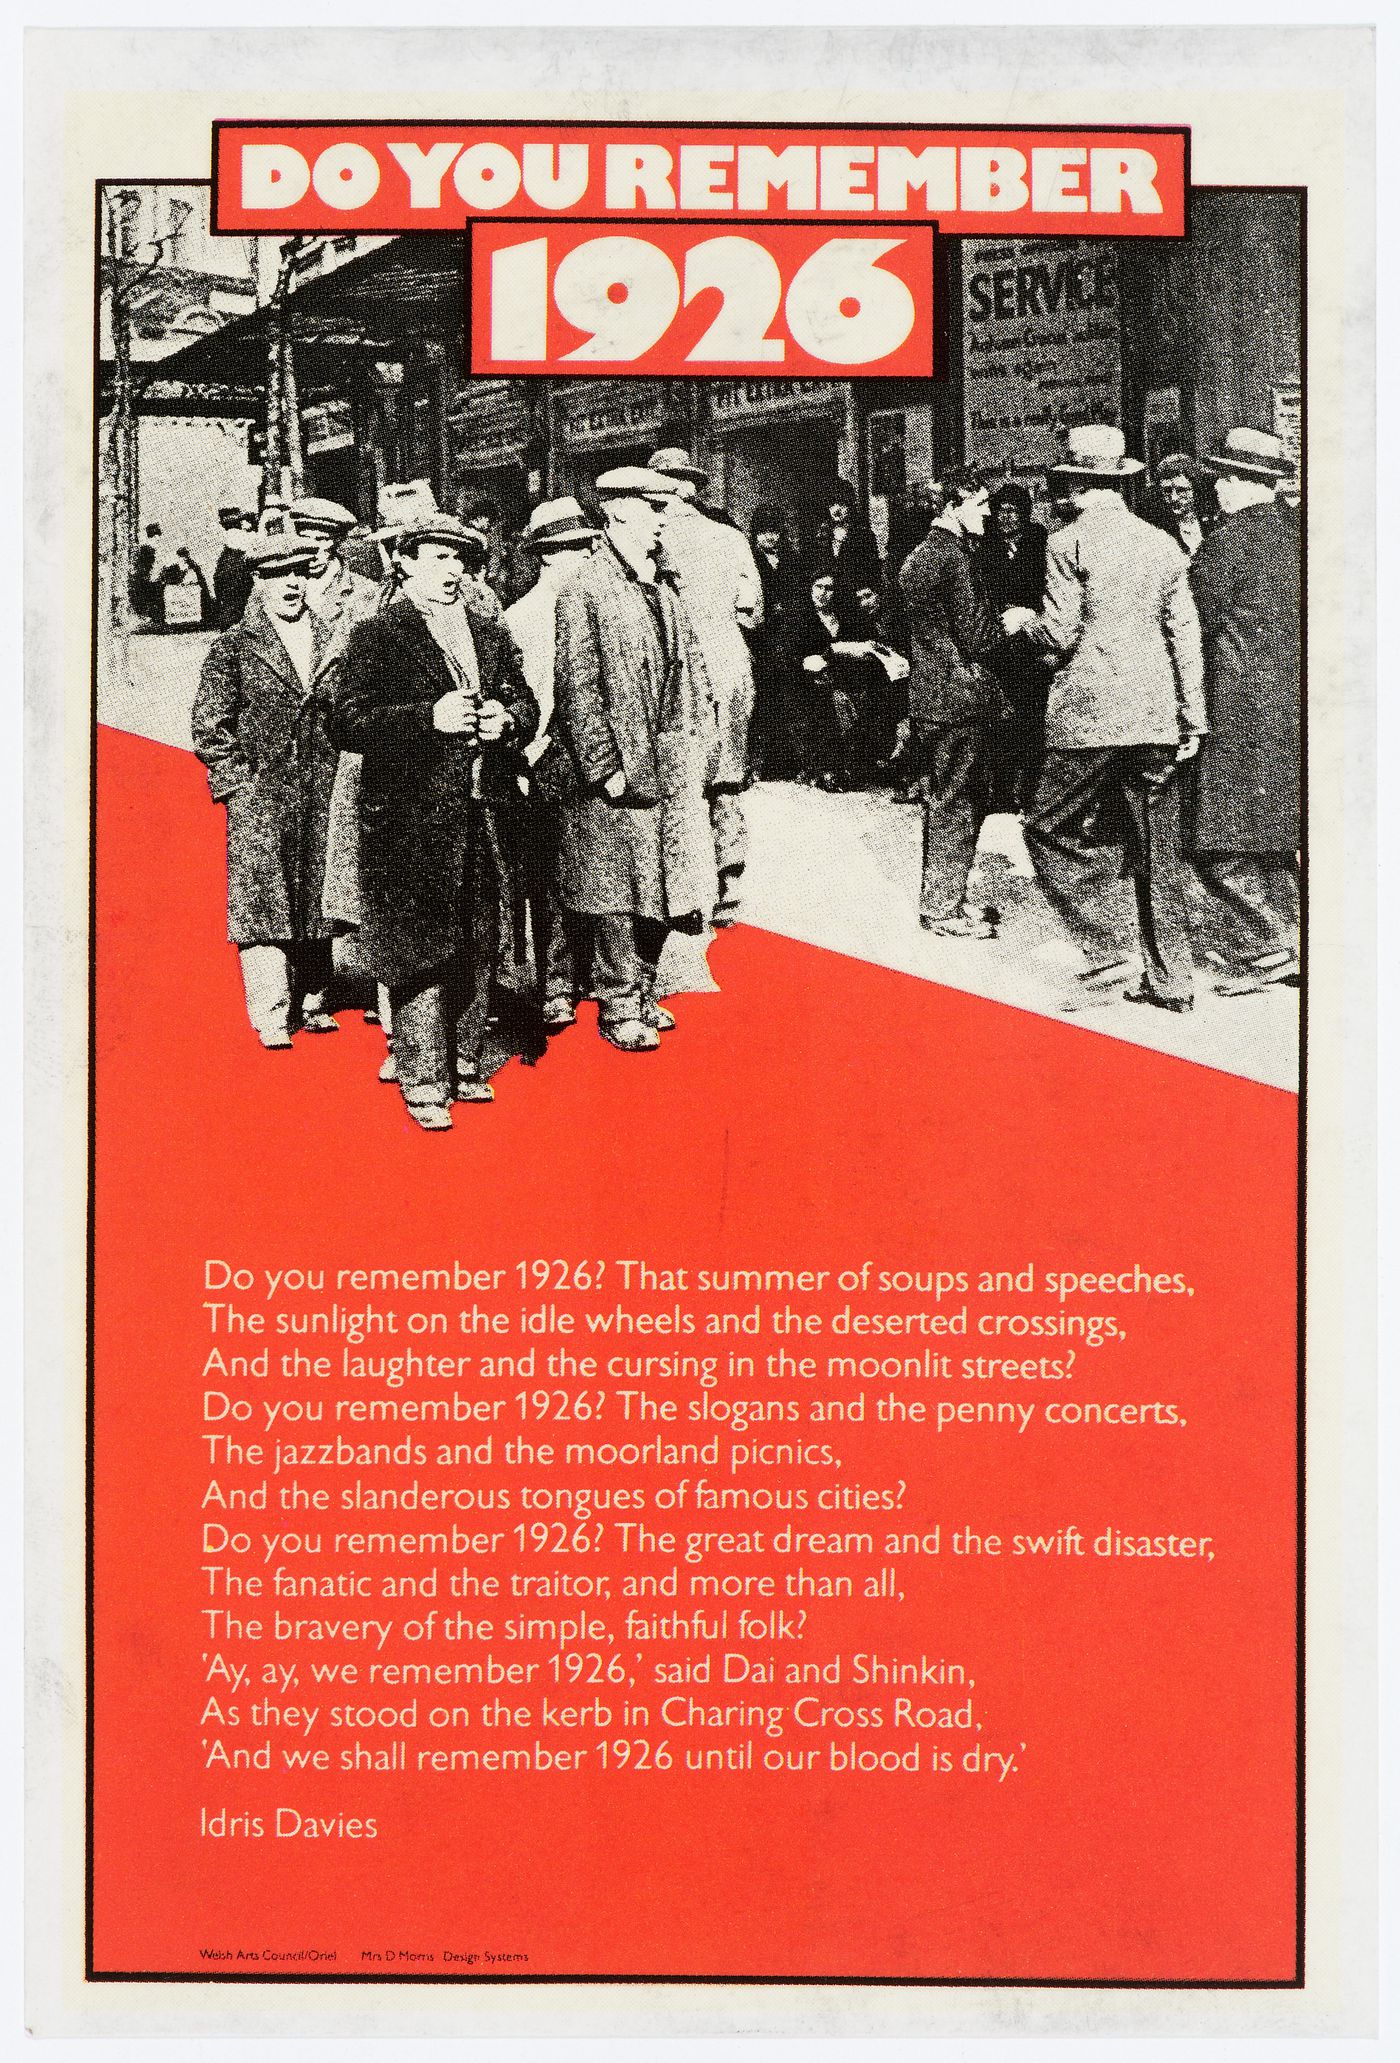 Postcard issued on the occasion of the 50th anniversary of the 1926 General Strike, featuring a poem by Idris Davies